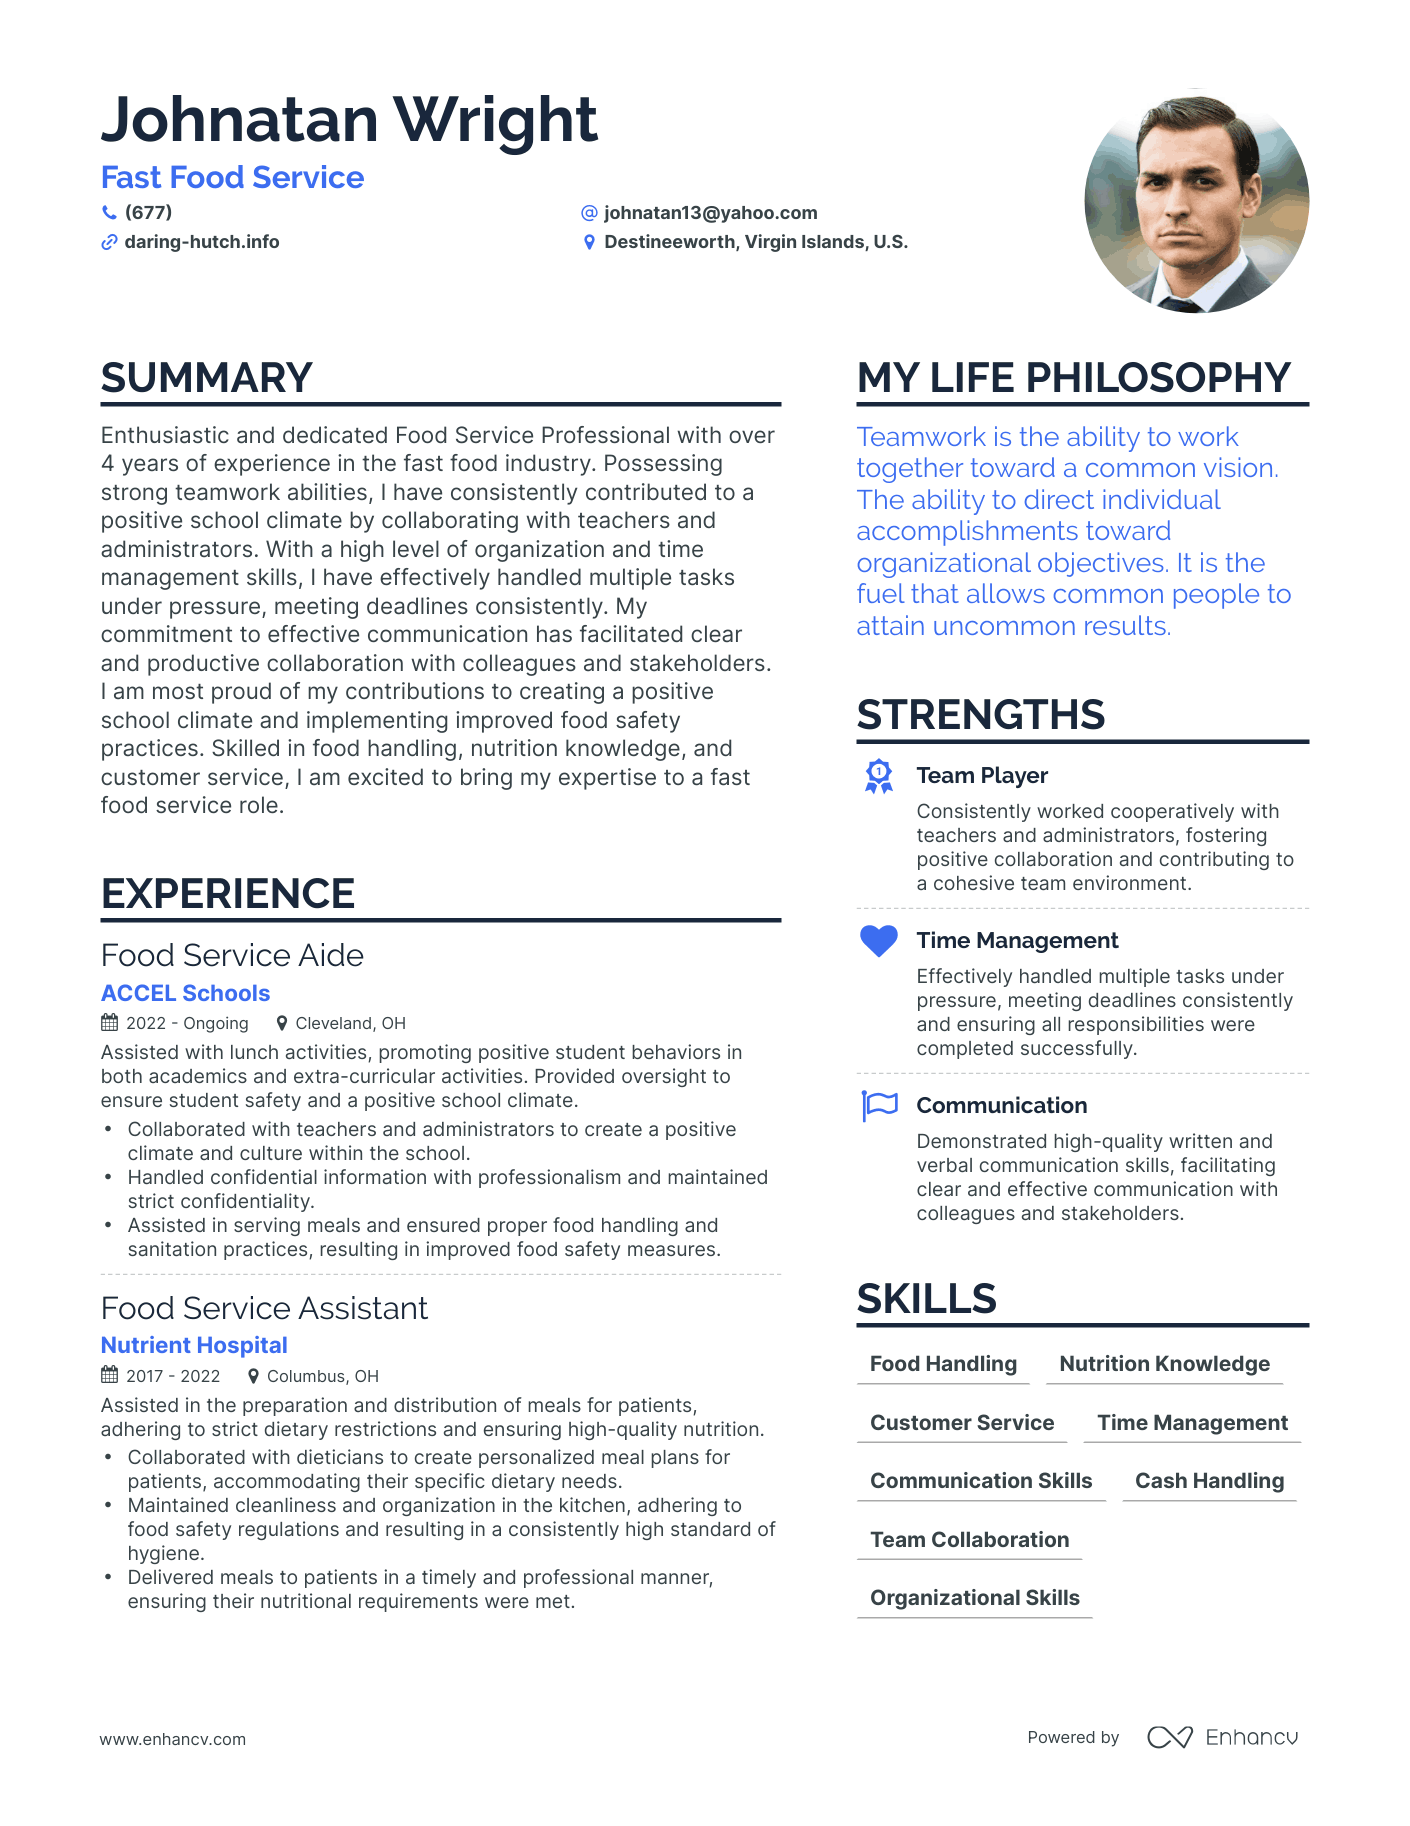 Fast Food Service resume example